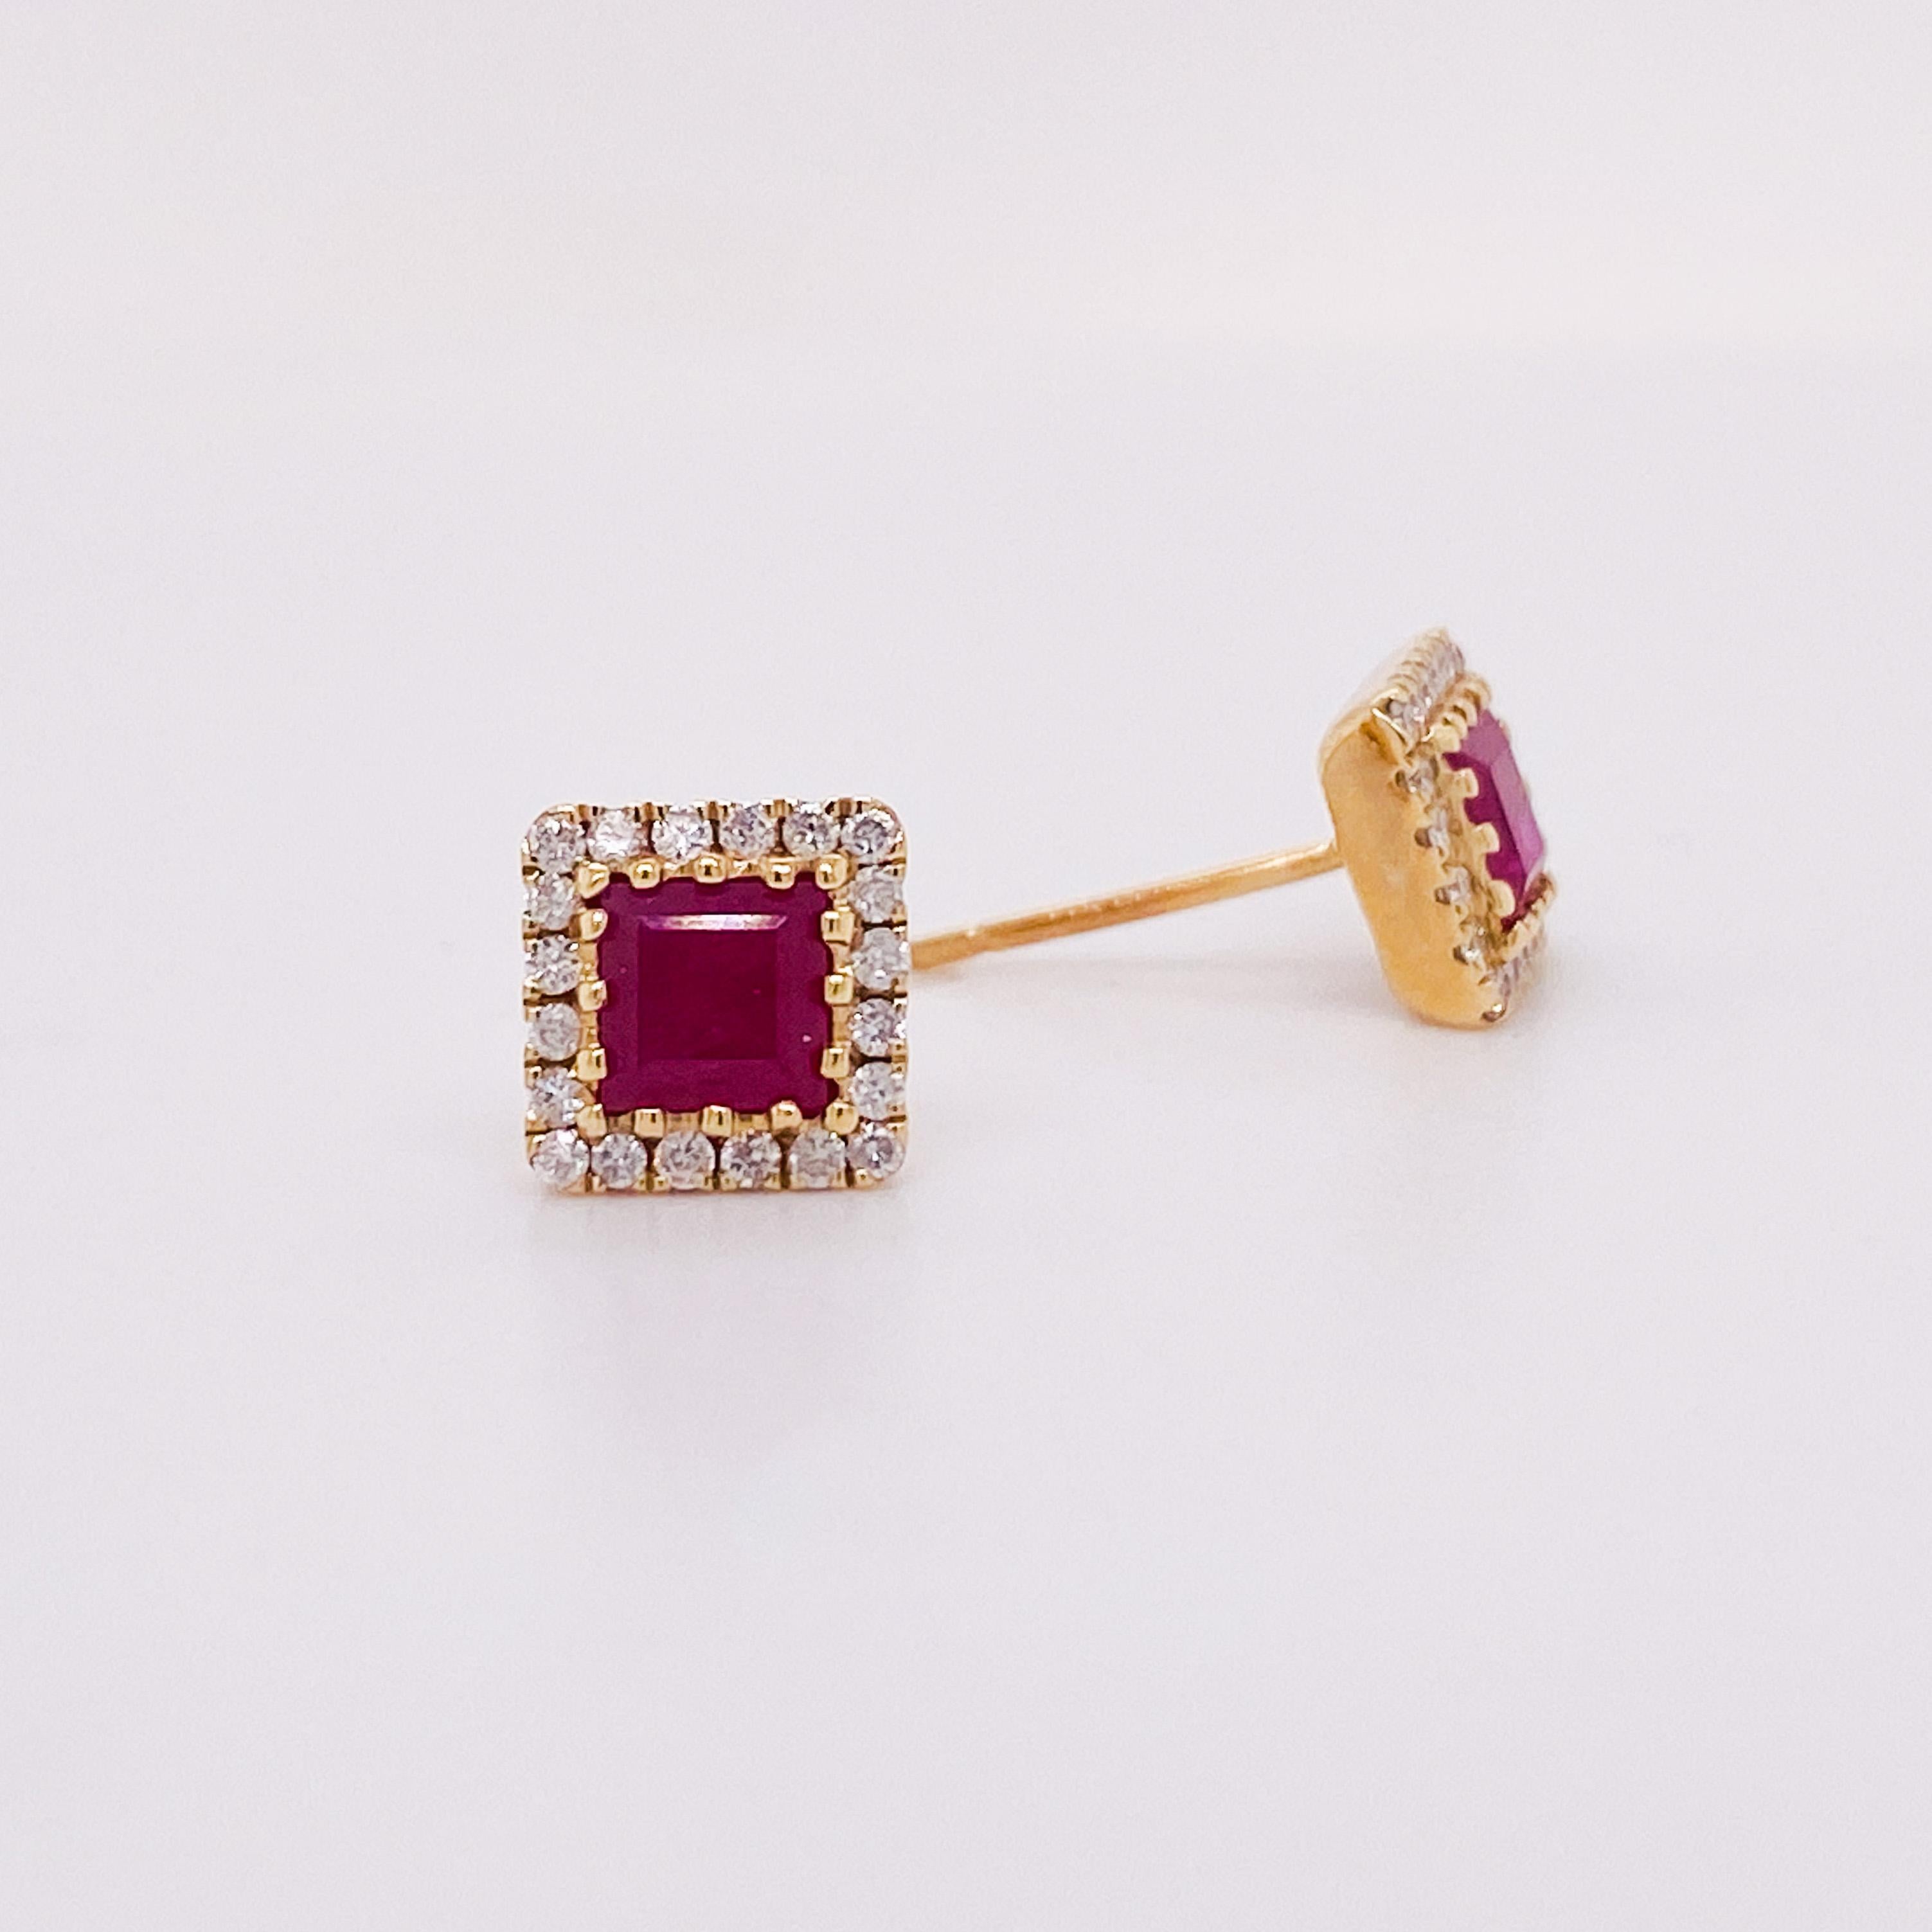 These genuine ruby and diamond earring studs are stunning! With a square, or princess cut, genuine ruby gemstone set in each earring. The ruby gemstone is framed with a diamond halo that sparkles and compliments the ruby beautifully. These ruby stud